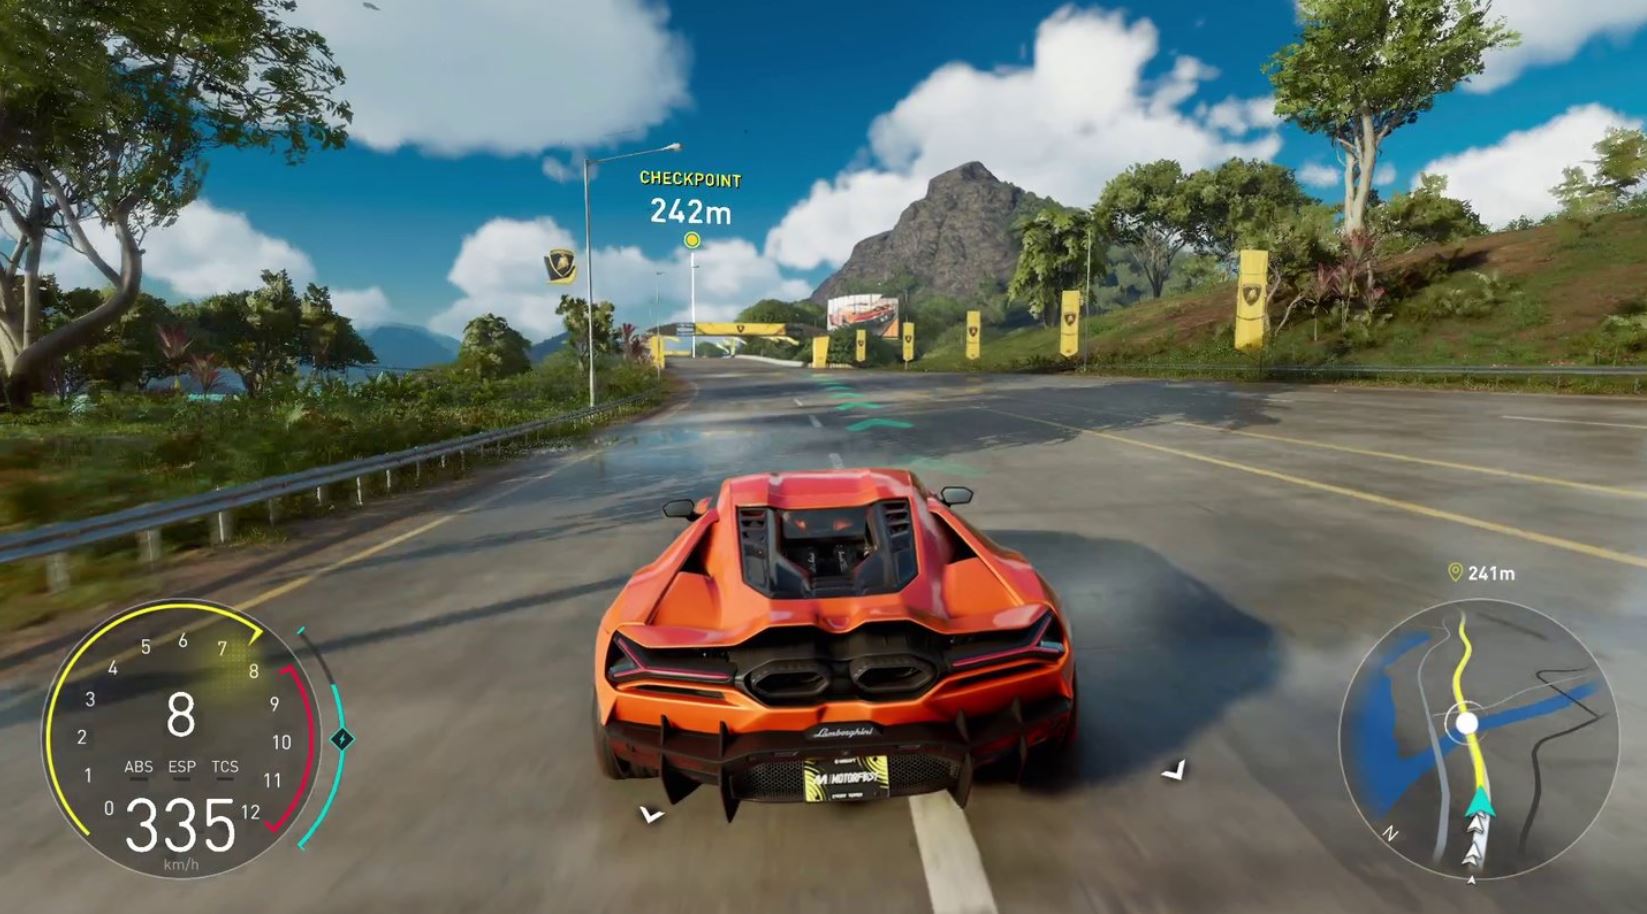 The Crew Motorfest  New Gameplay Today - Game Informer